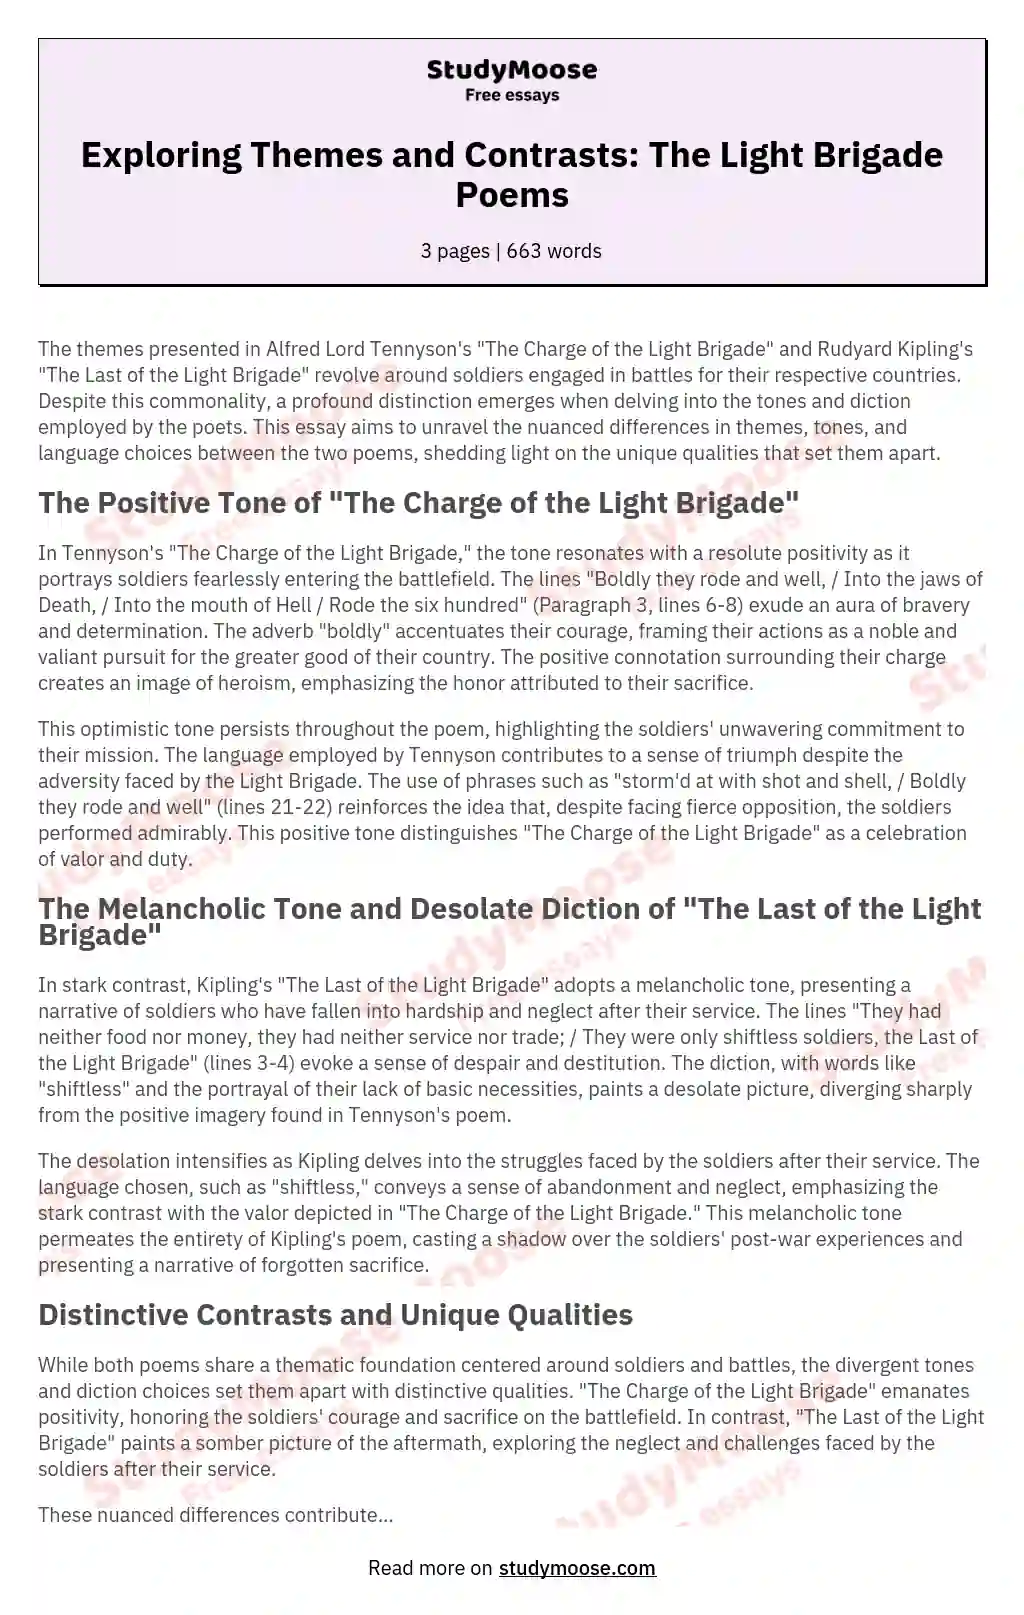 Exploring Themes and Contrasts: The Light Brigade Poems essay